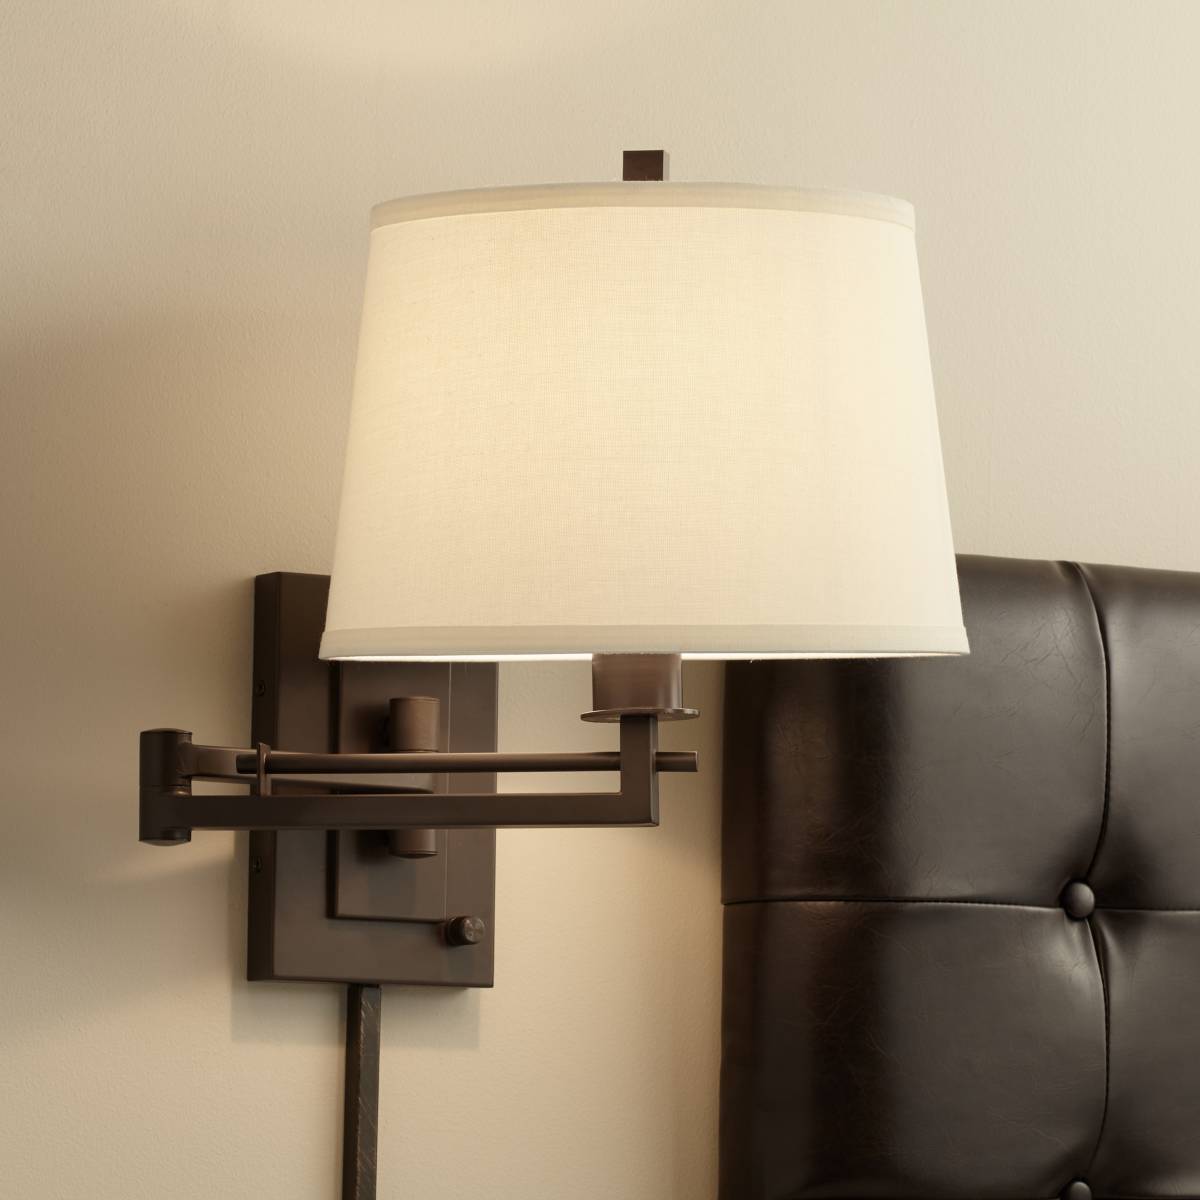 Wall Lamps Decorative Mounted, Wall Mounted Night Table Lamps